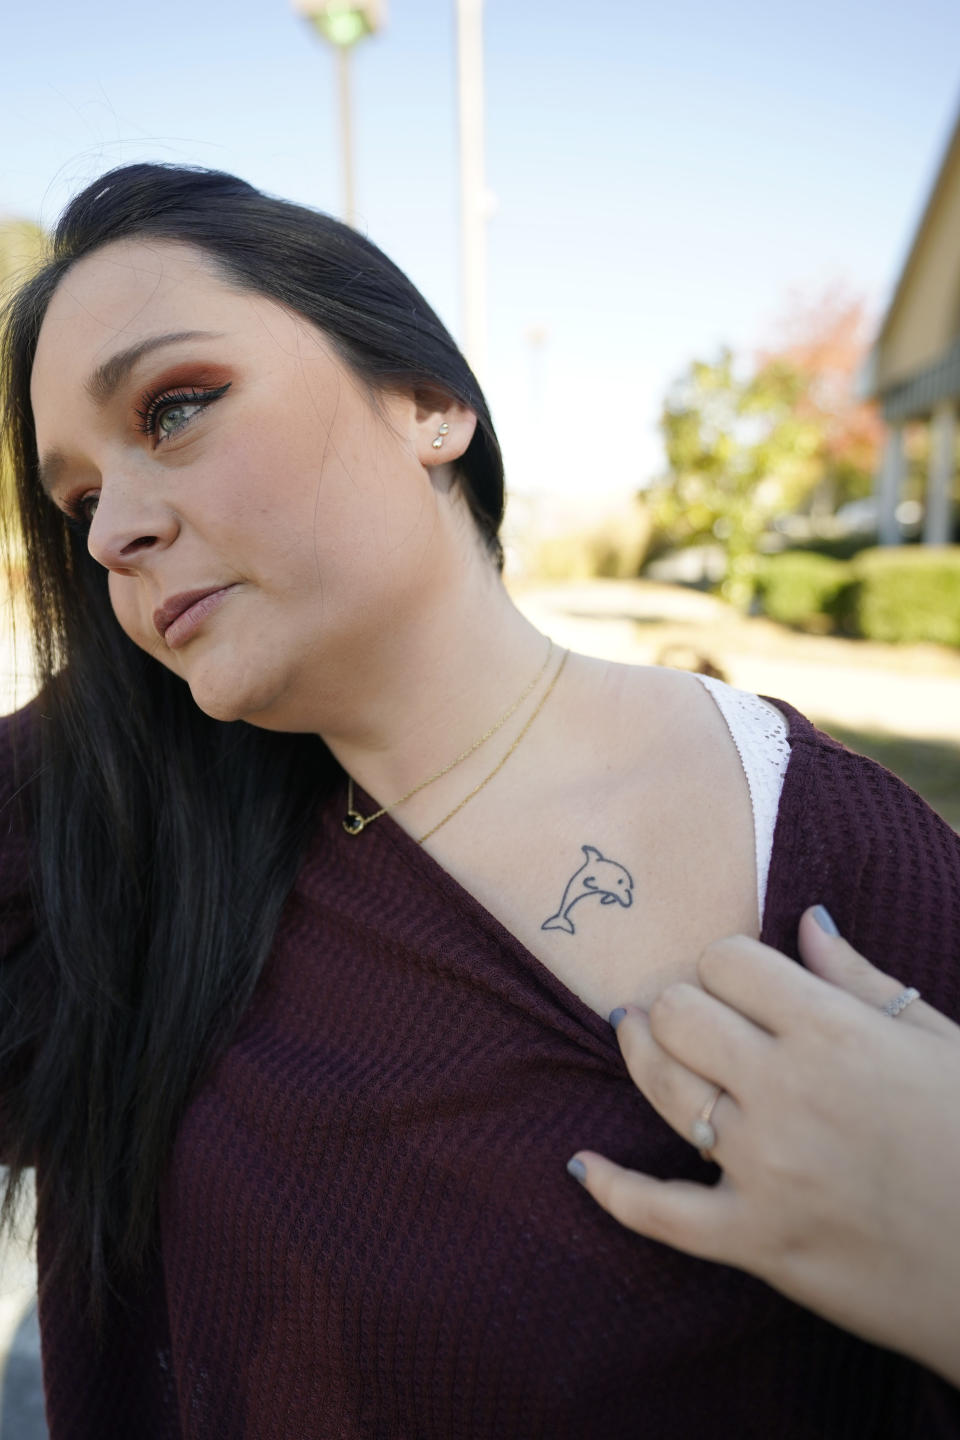 Lindsey Kirk shows a tattoo on her neck that commemorates her late mother's favorite animal, a dolphin, on Saturday, Nov. 13, 2021, in New Albany, Miss. She was 12 years old when her stepfather, David Neal Cox, terrorized her family, sexually assaulted her, and killed her mother, Kim Kirk Cox, in May 2010 at a home in Sherman, Miss. The Mississippi Supreme Court set an execution date of Wednesday, Nov. 17, 2021, for Cox after he said he wanted to surrender all appeals. (AP Photo/Rogelio V. Solis)